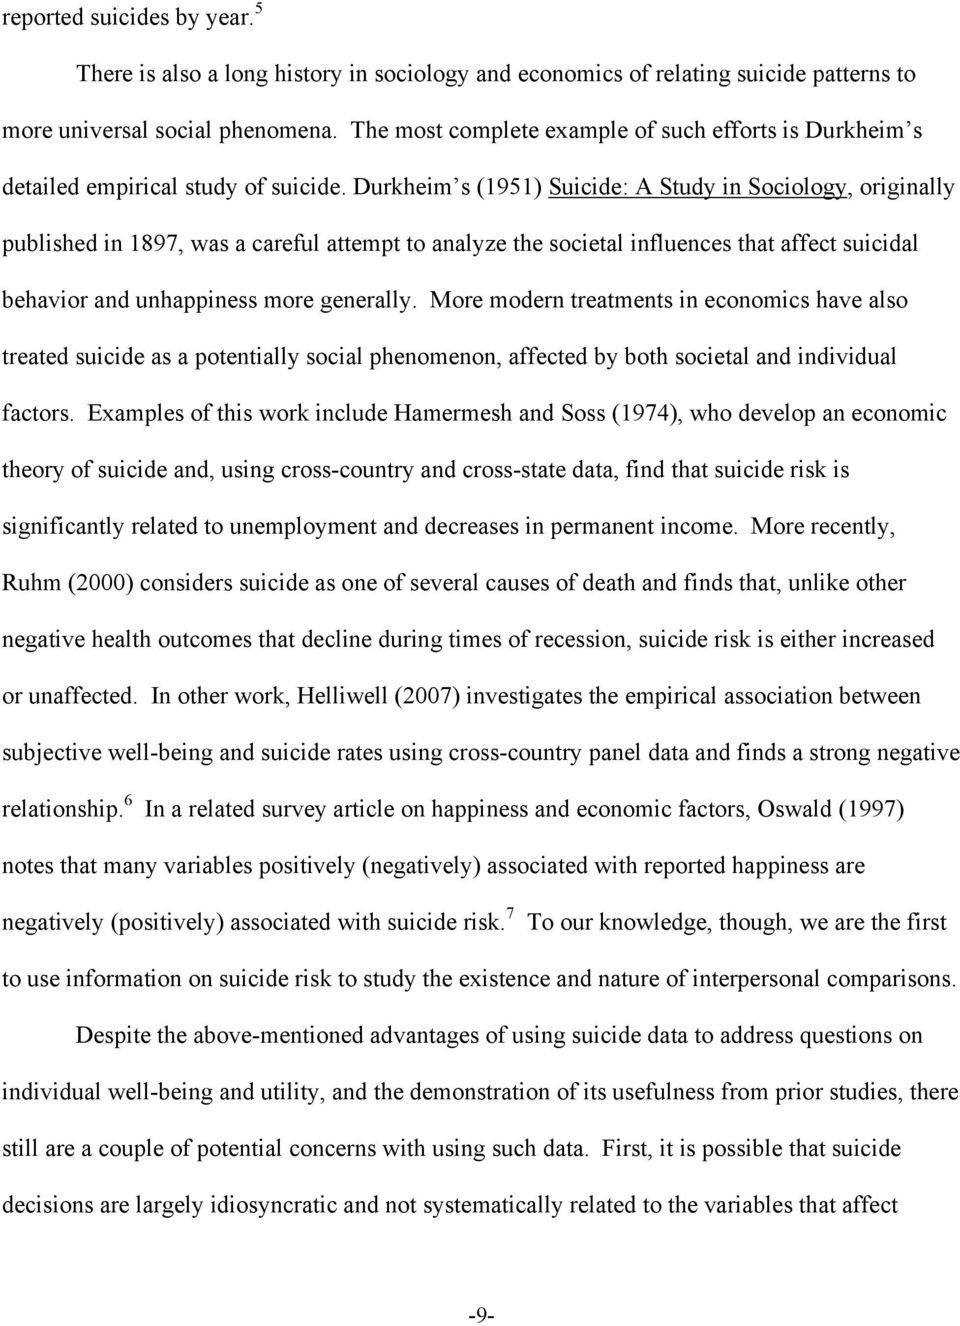 Durkheim s (1951) Suicide: A Study in Sociology, originally published in 1897, was a careful attempt to analyze the societal influences that affect suicidal behavior and unhappiness more generally.